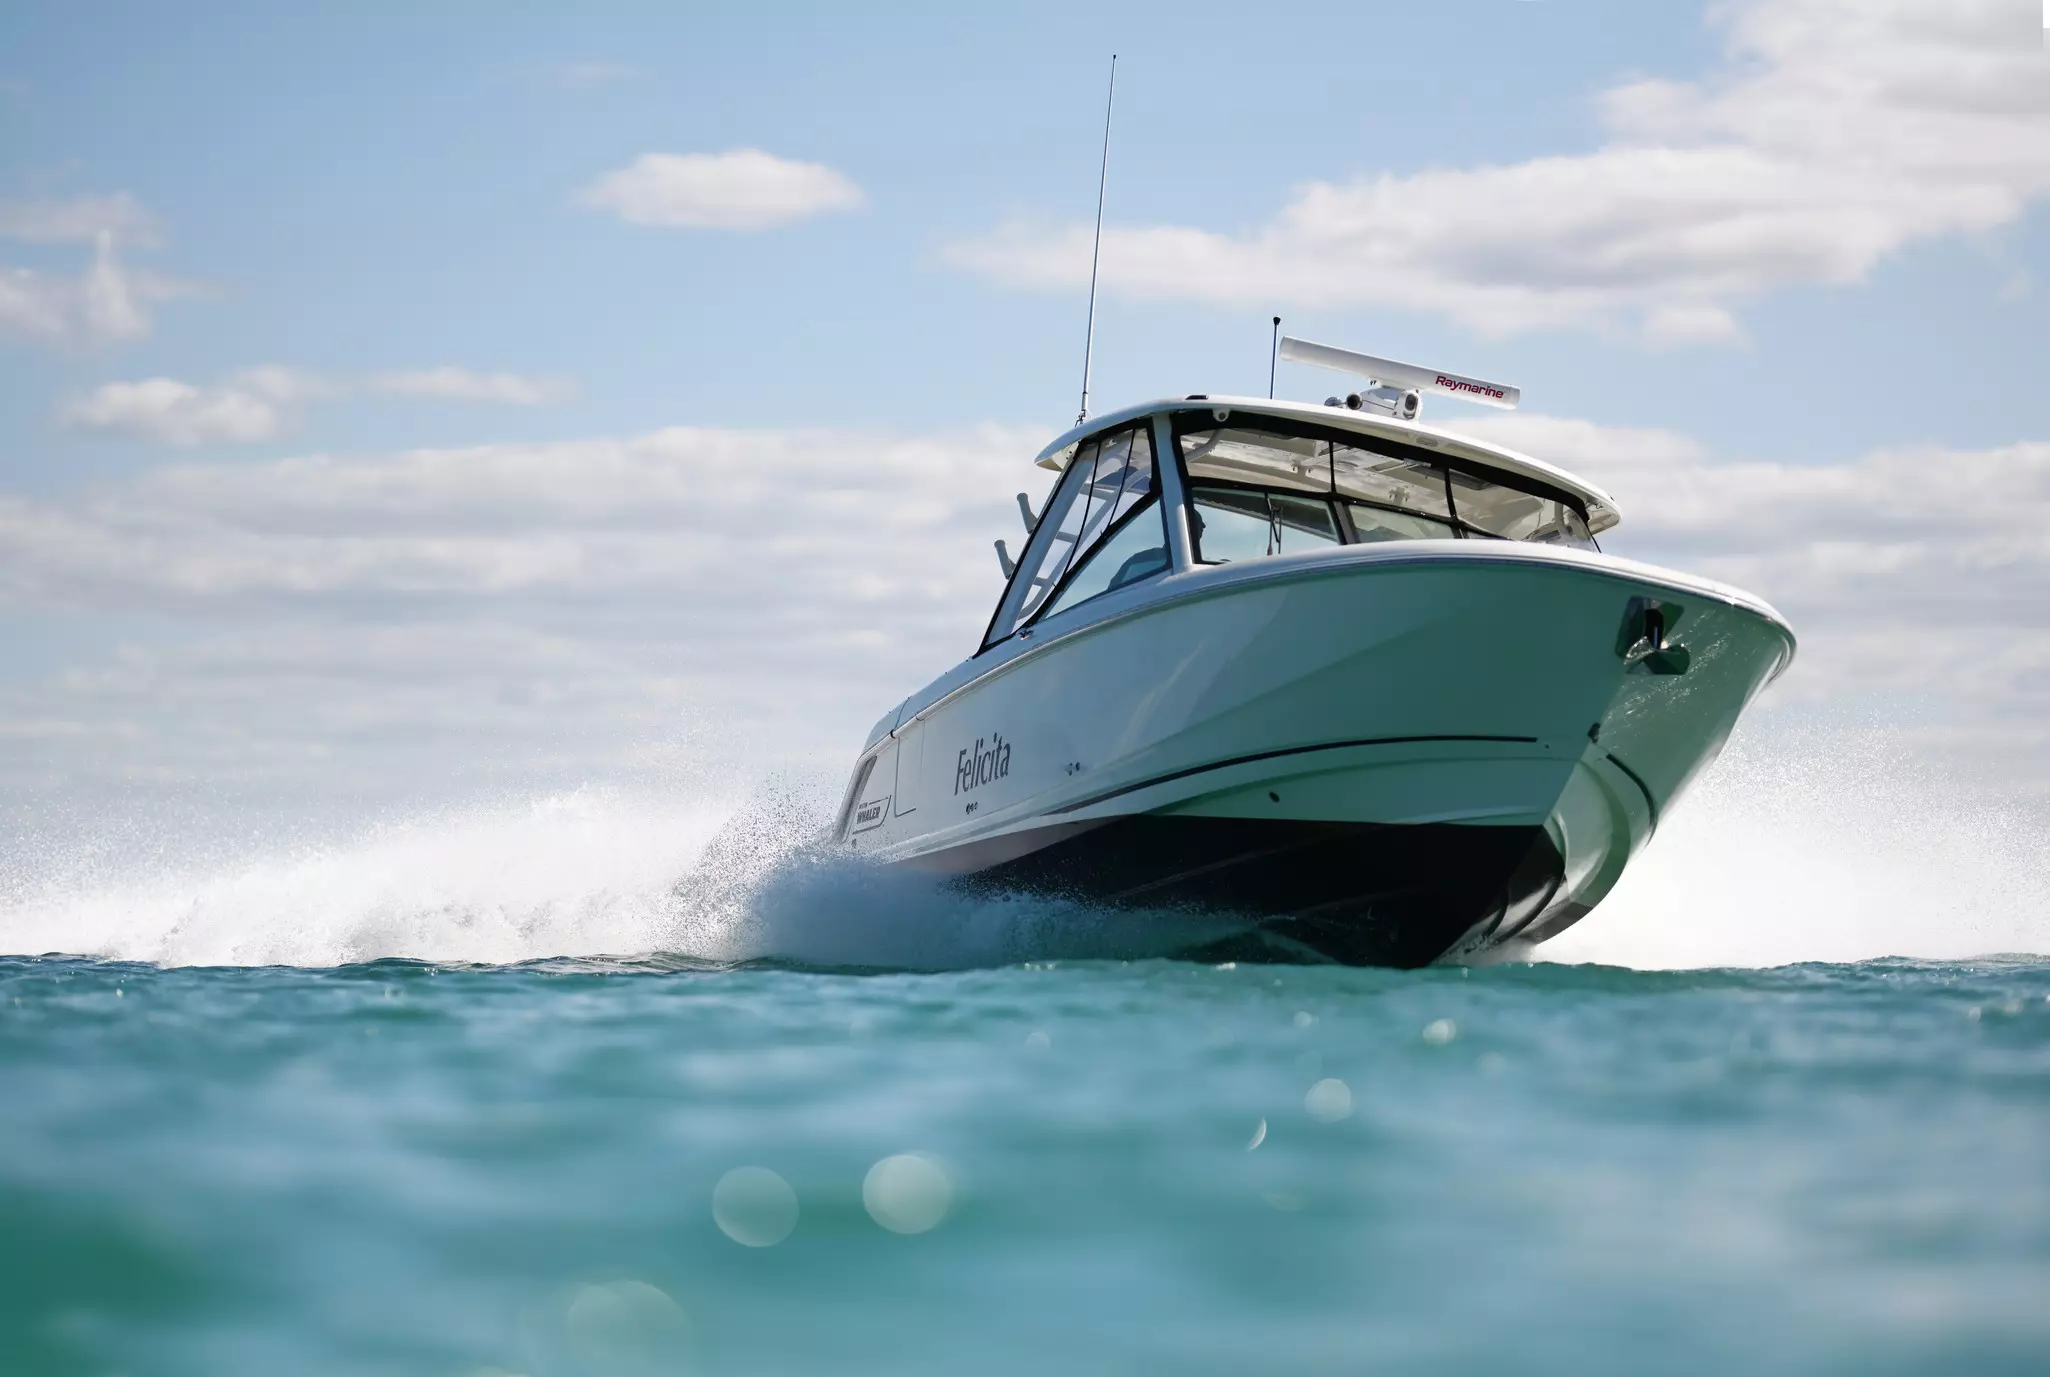 Outboard fishing boat with Raymarine gear